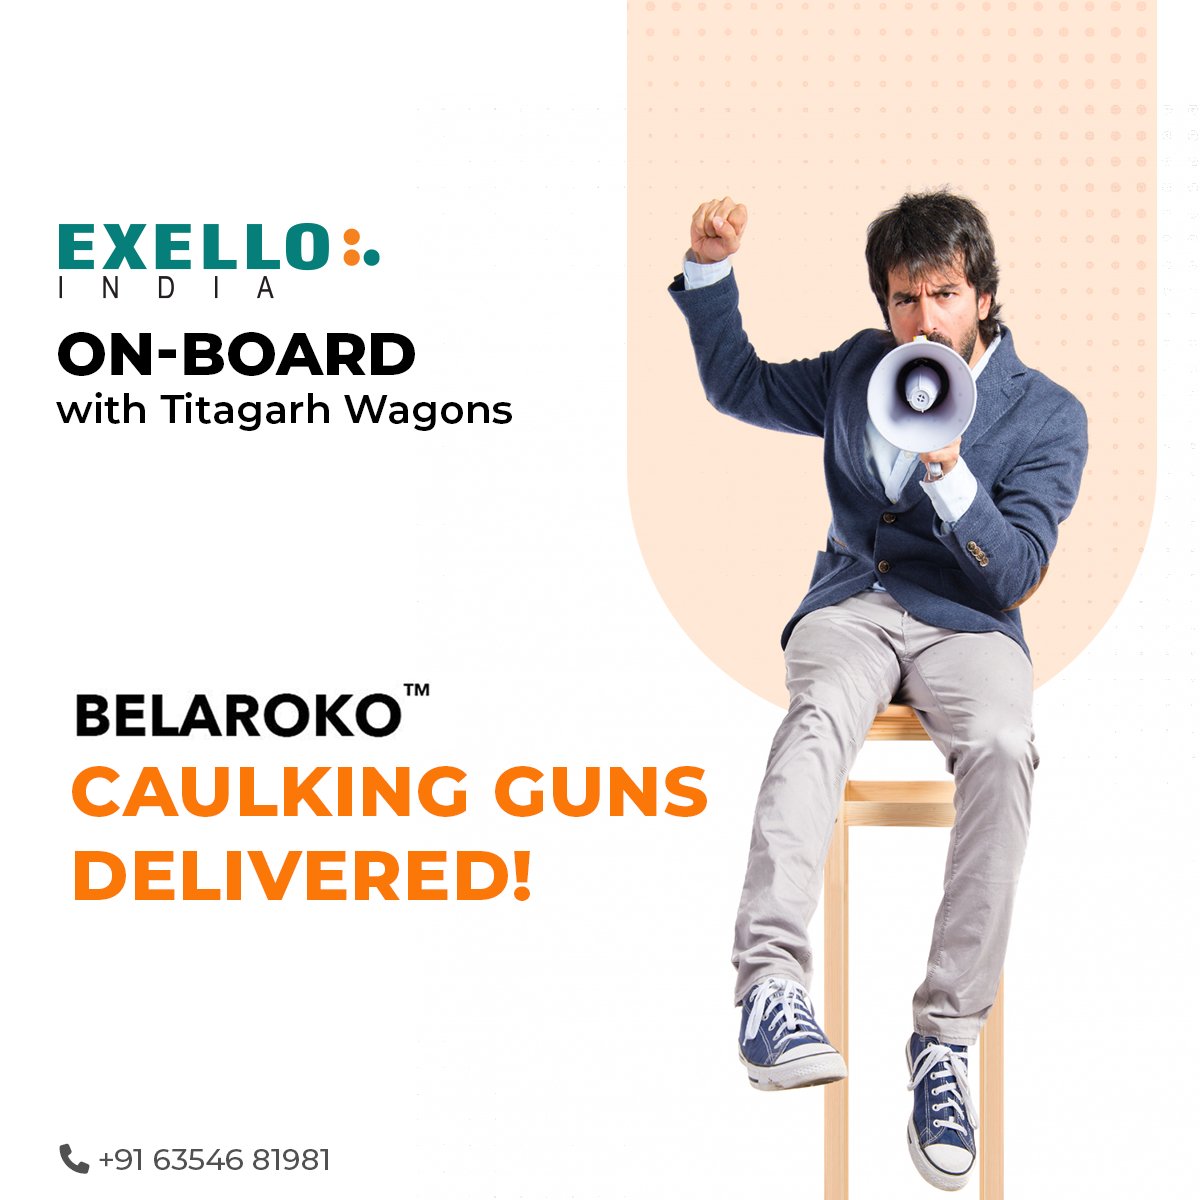 We are sure Titagarh Wagons are going to excel with Belaroko 3100 A Caulking Guns. Find Belaroko and other international brands at Exello.
.
.
#Exello #ExelloIndia #industrialtools #highqualitytools #Belaroko #Belarokocaulkingguns #caulkingguns